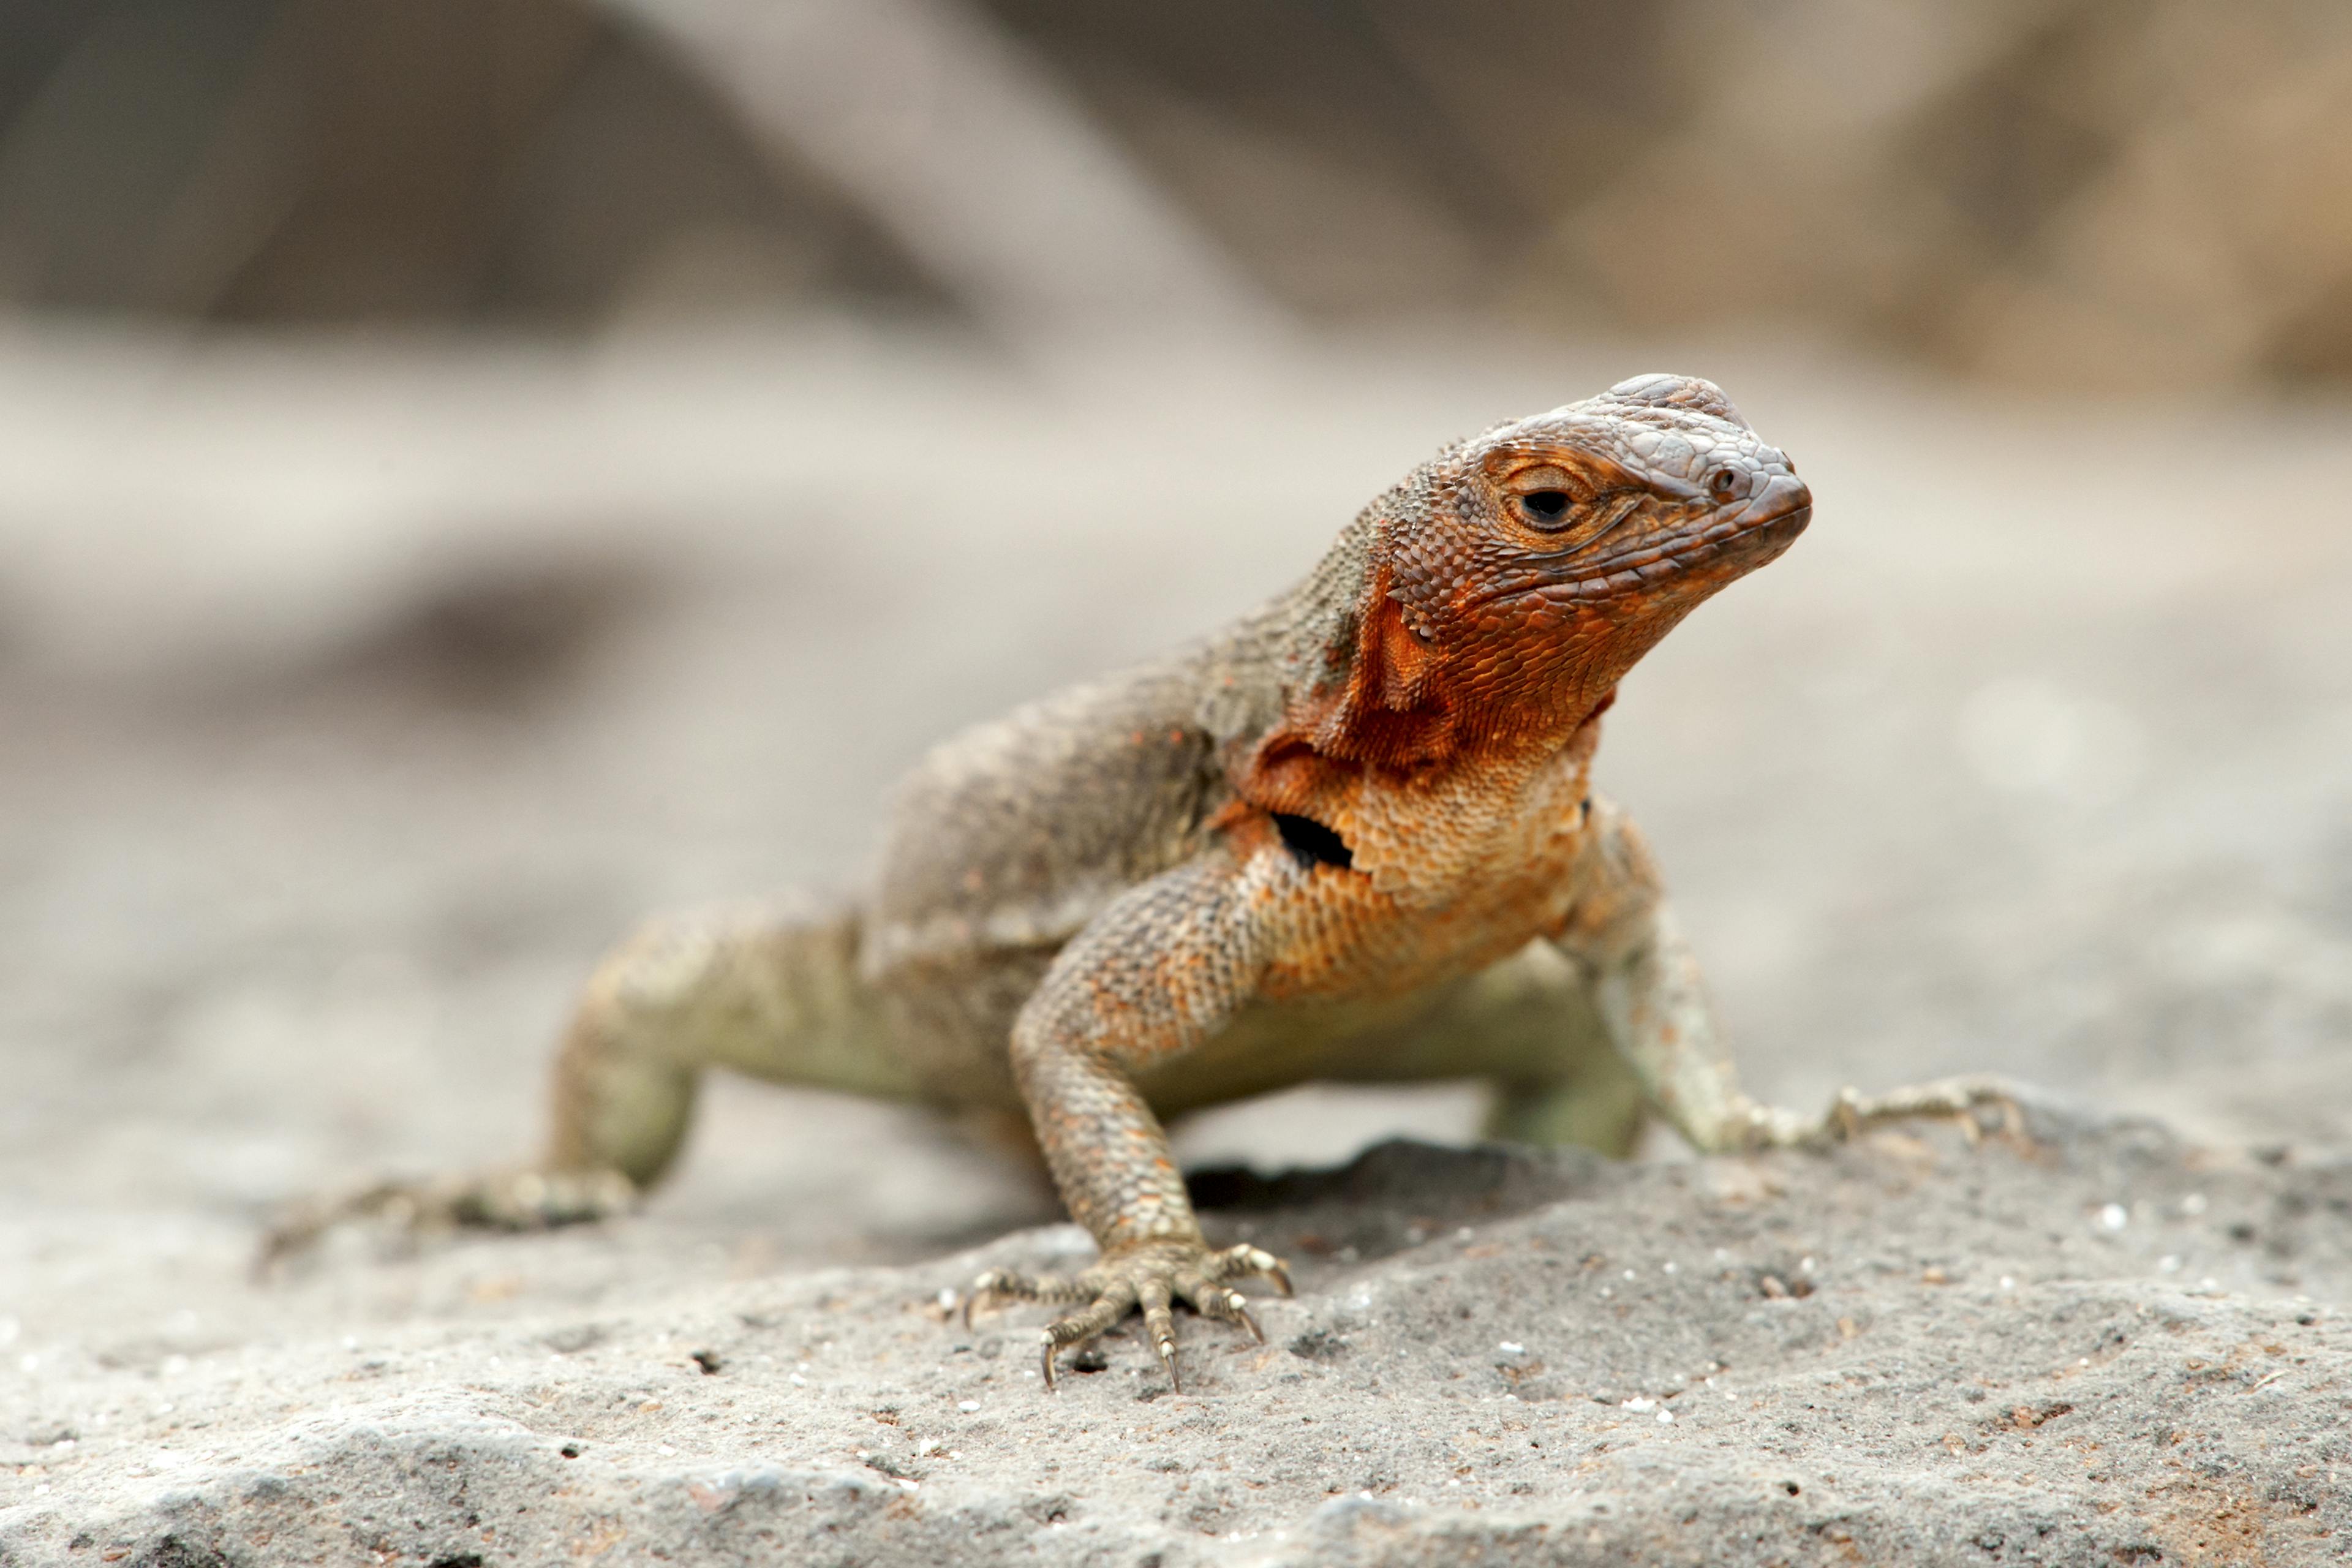 Learn more about the Lava Lizard